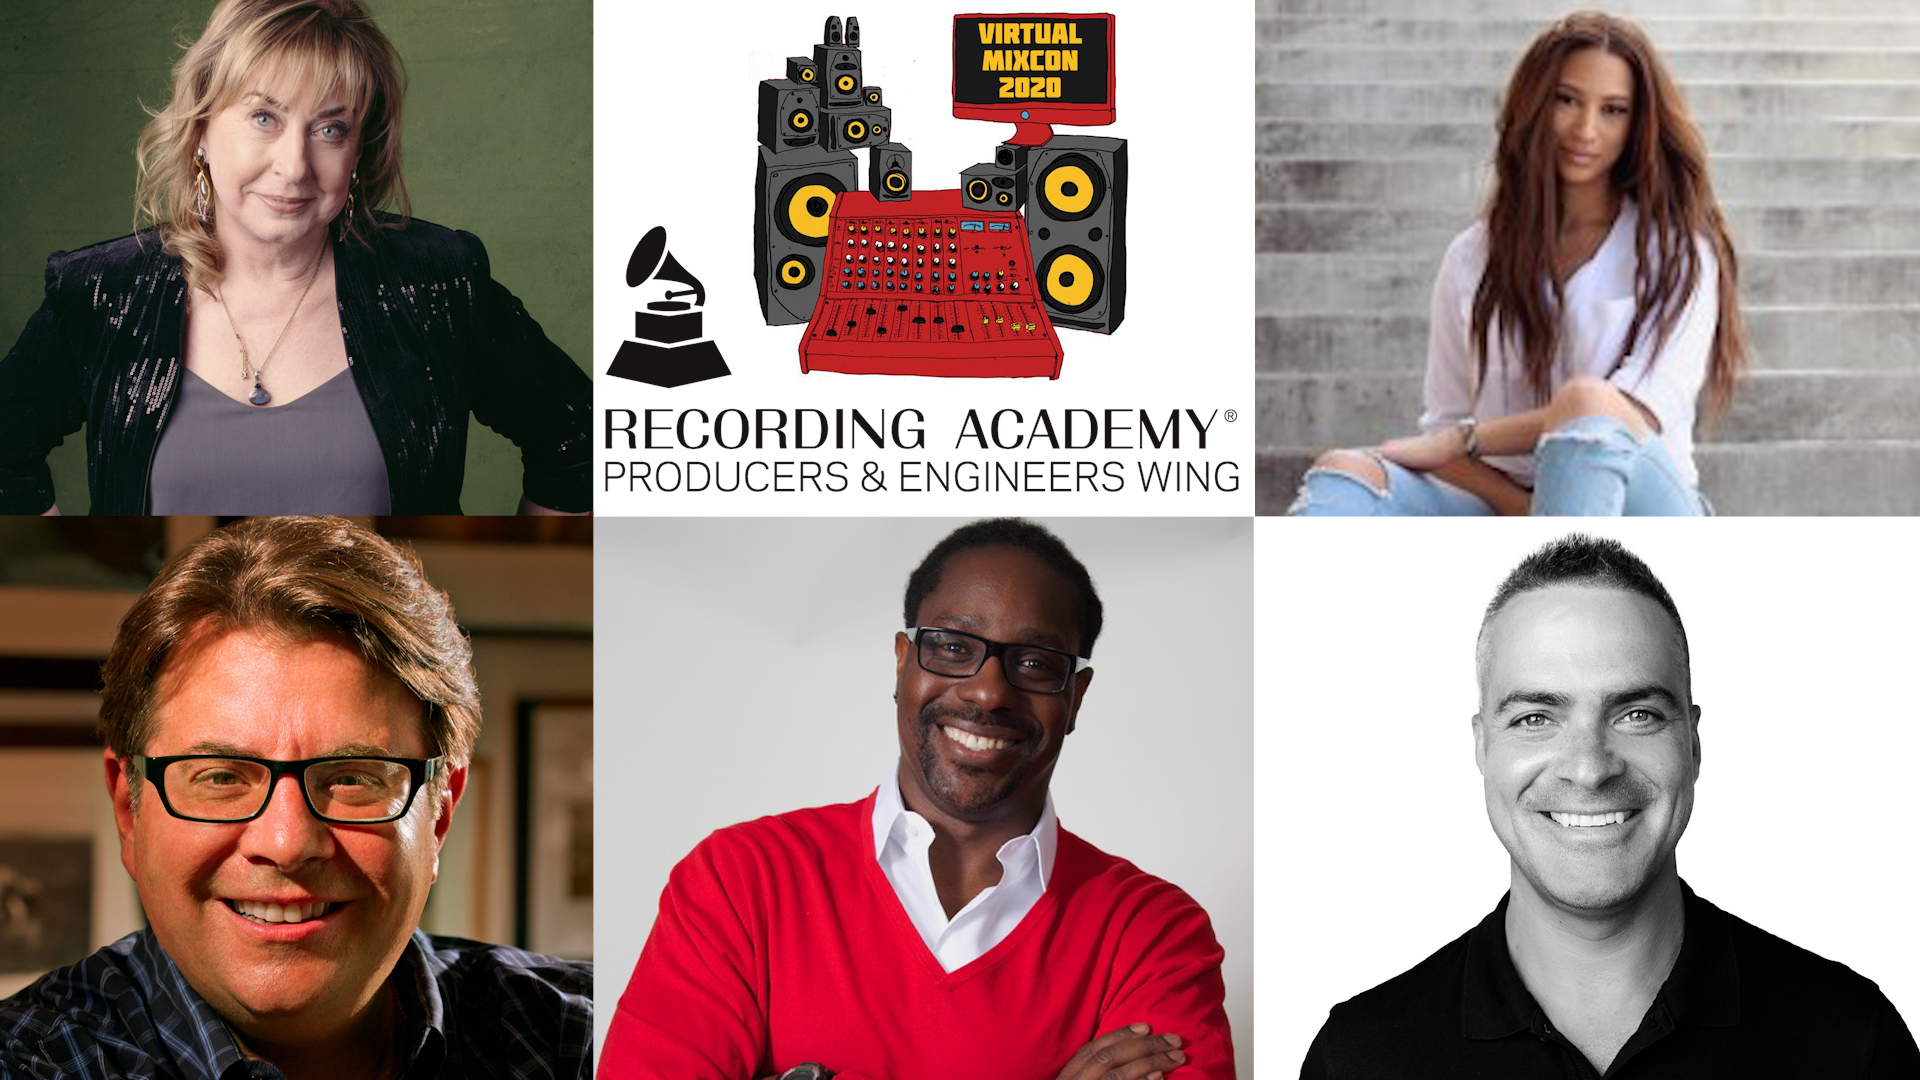 Producer and Mixer Managers: Guiding Audio Careers [MixCon Panel]